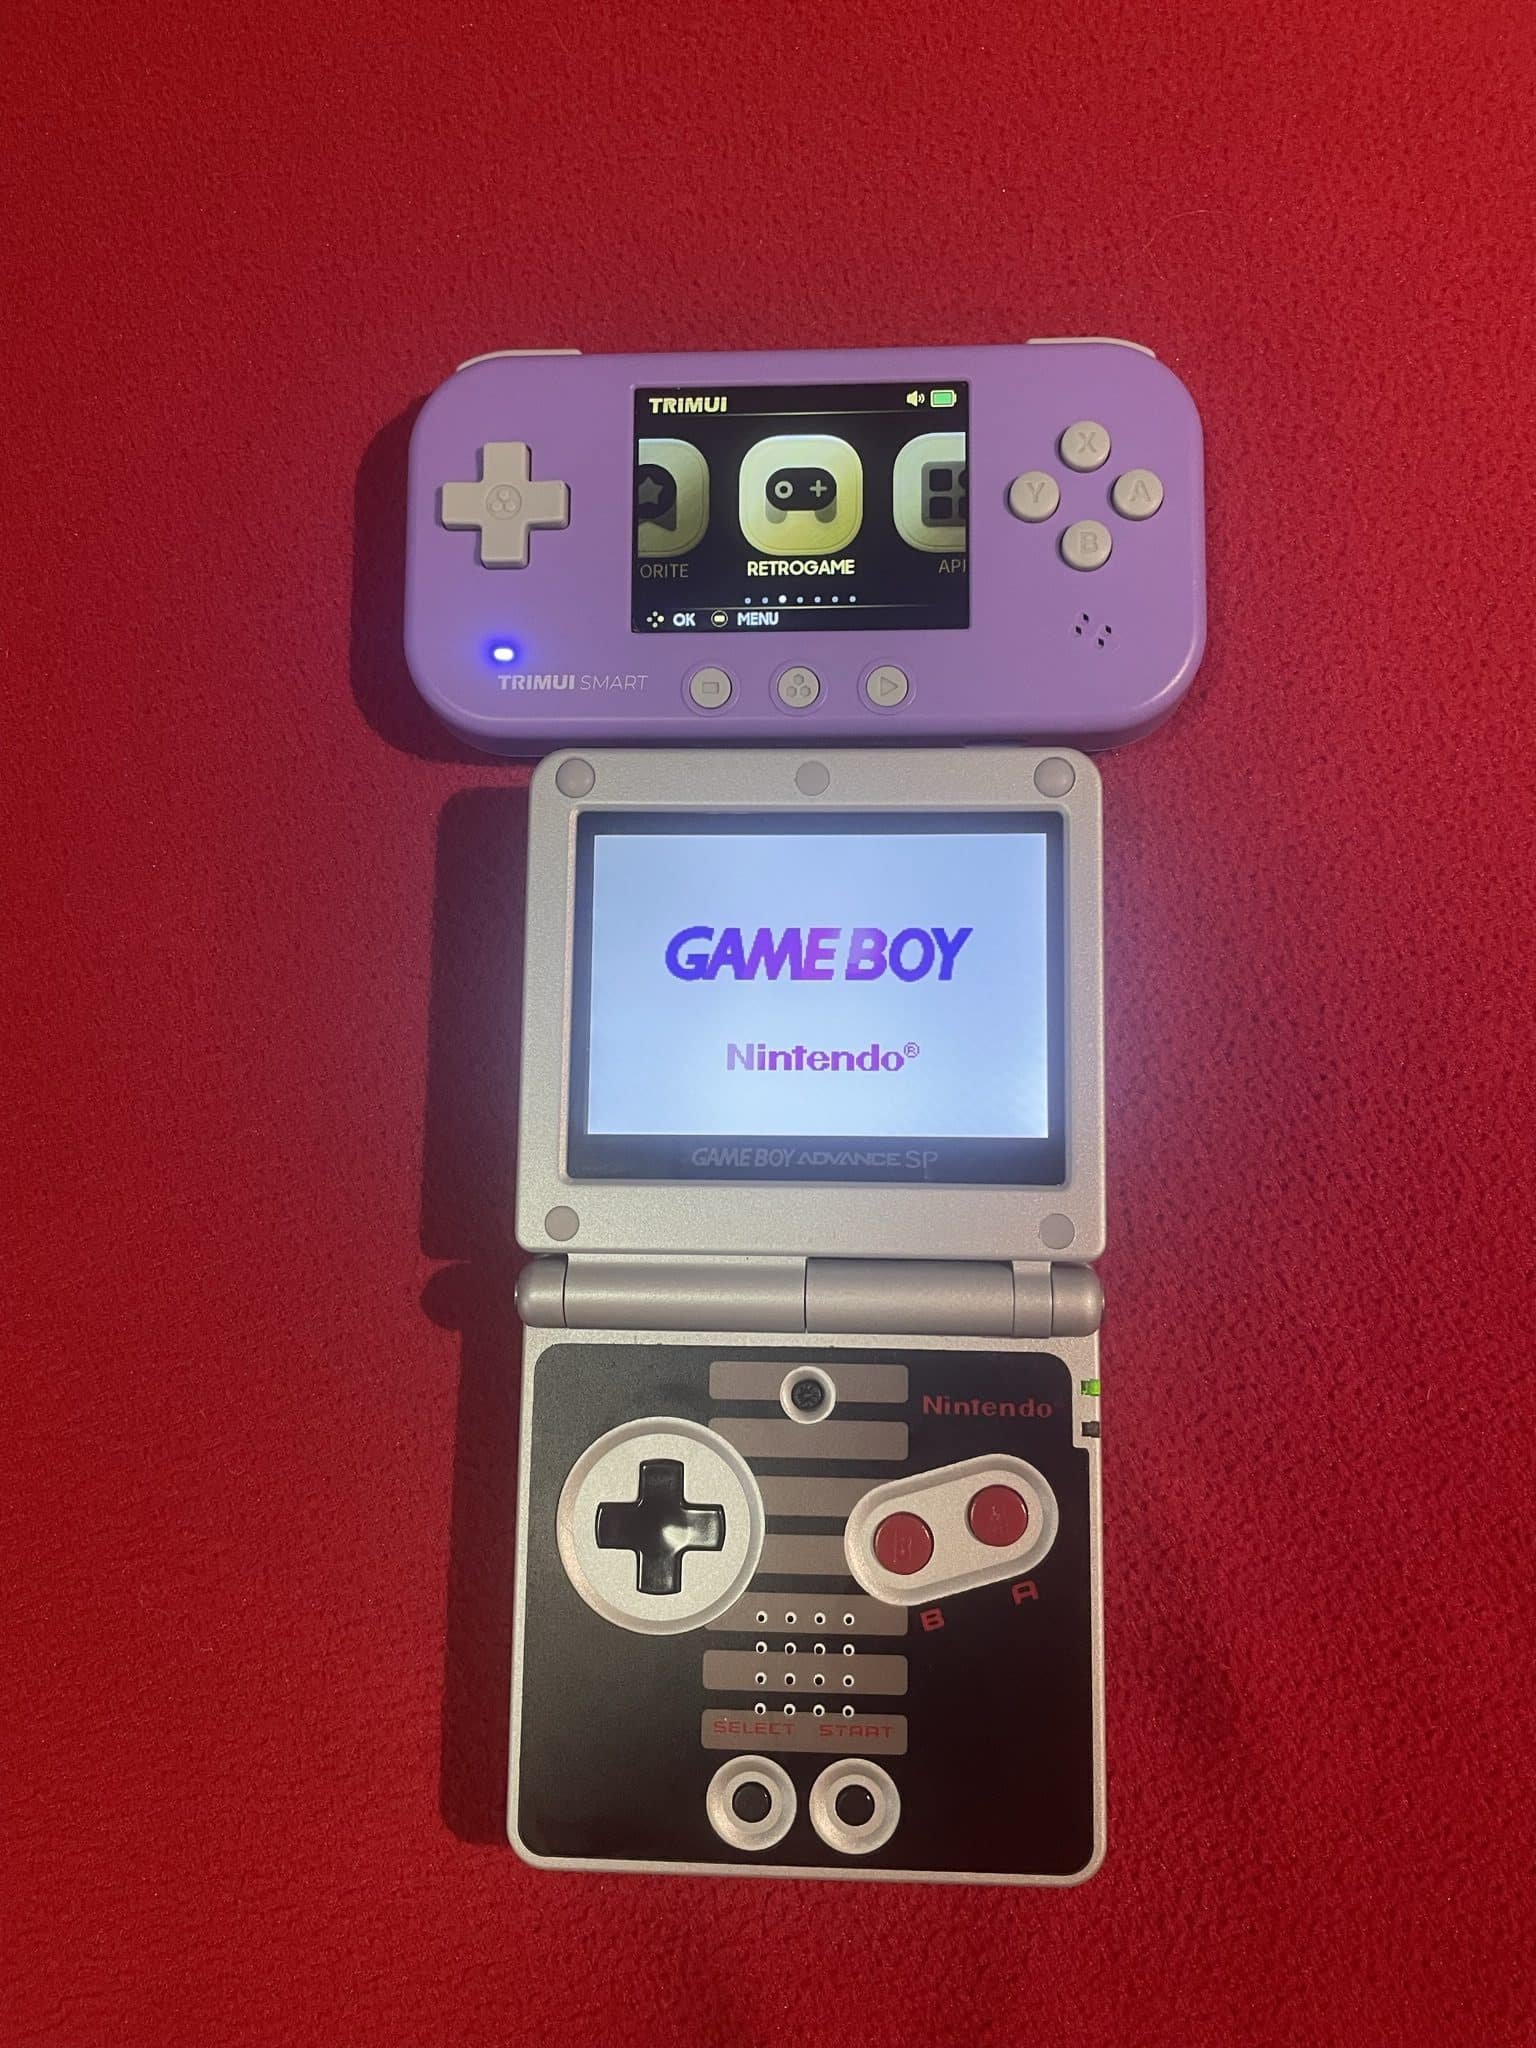 Trimui smart handheld emulation device compared to a gba sp.